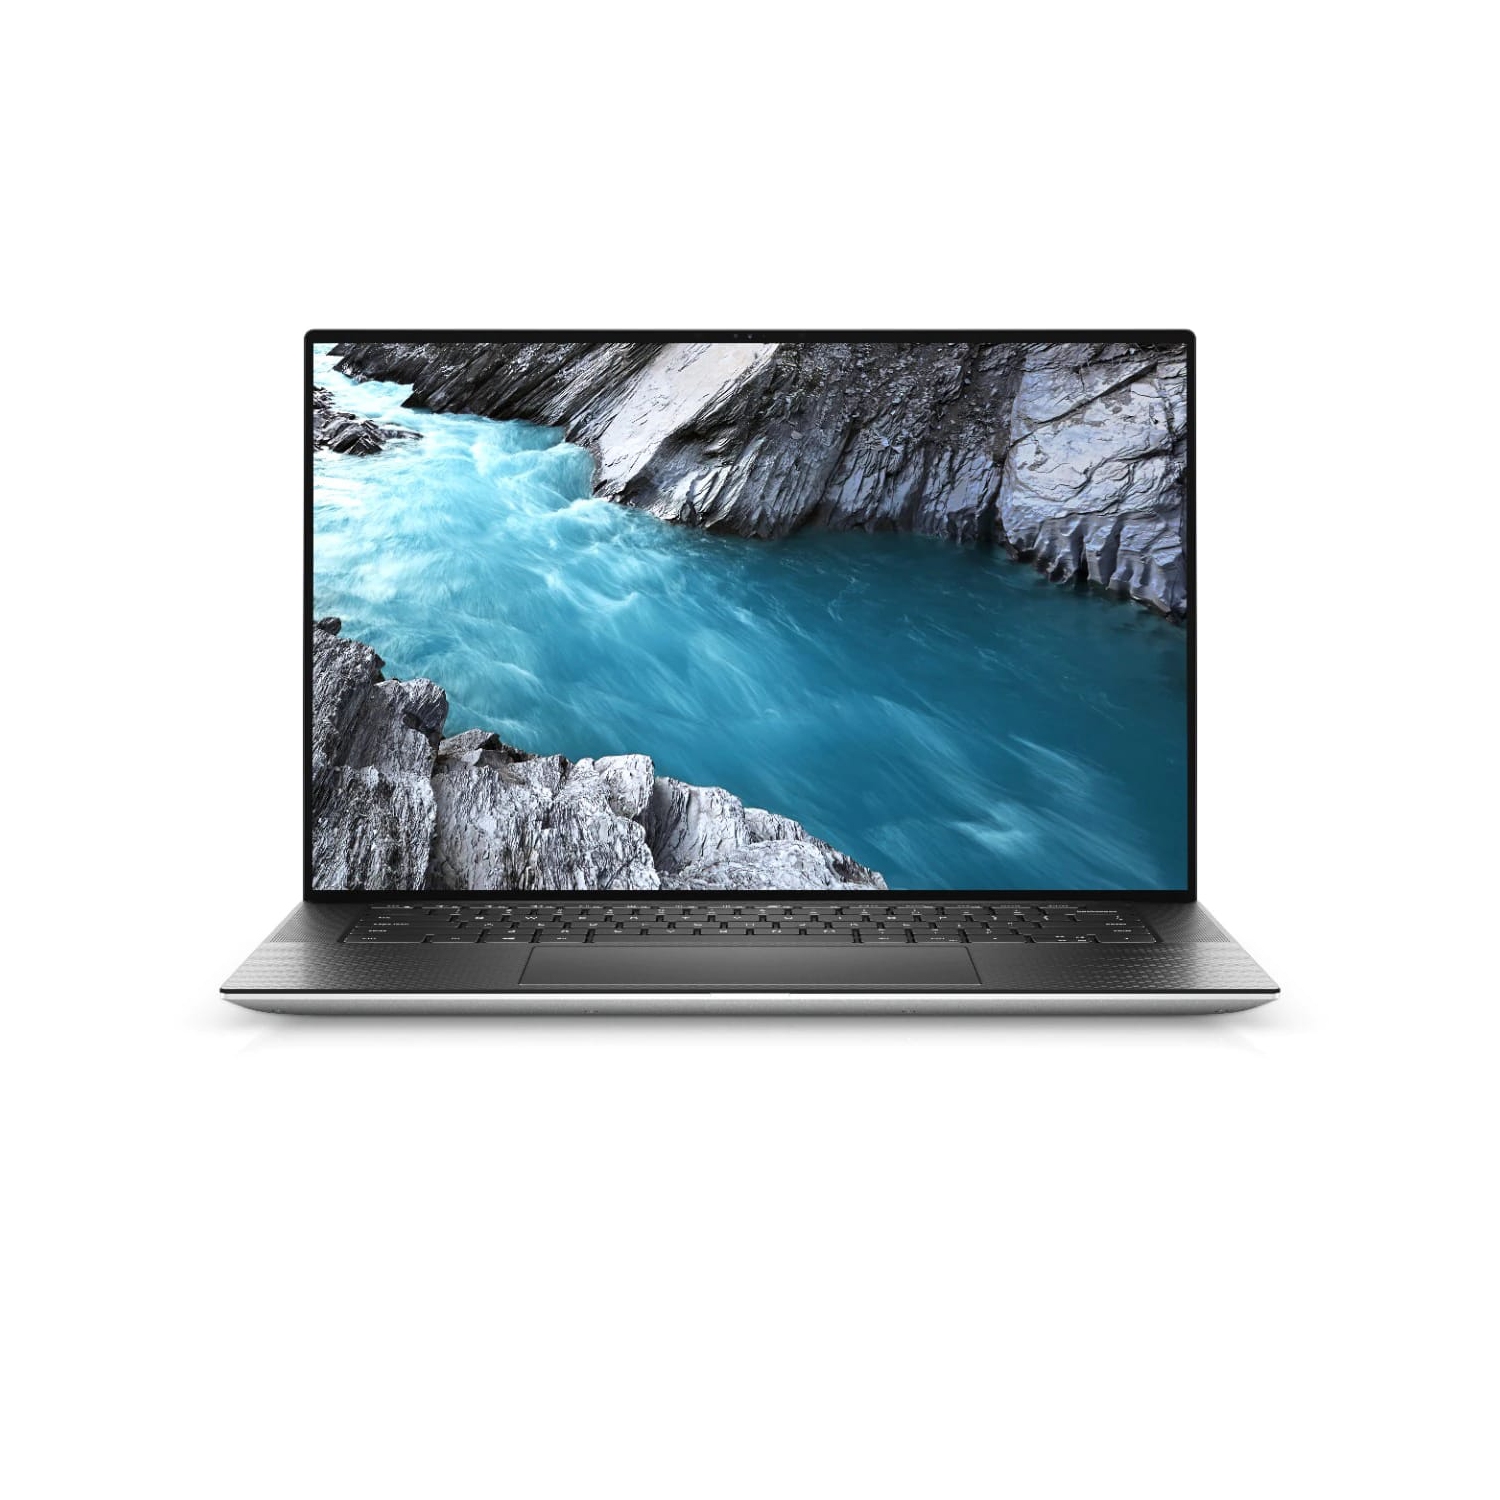 Refurbished (Excellent) - Dell XPS 15 9500 Laptop (2020) | 15" FHD+ | Core i5 - 1TB SSD - 16GB RAM | 4 Cores @ 4.5 GHz - 10th Gen CPU Certified Refurbished